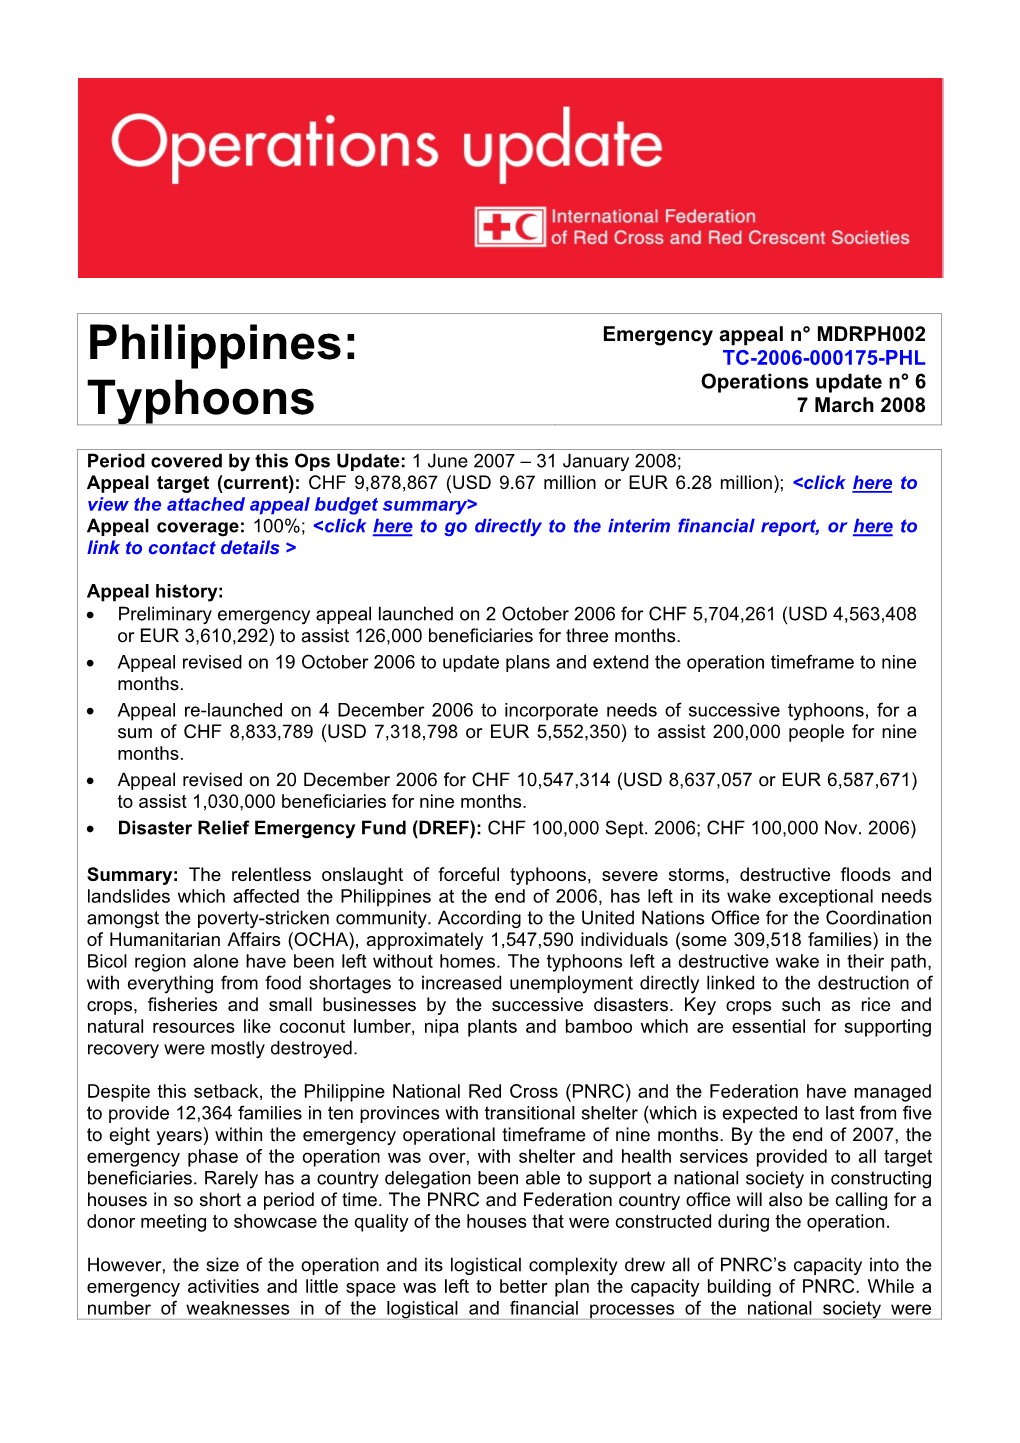 Philippines: Typhoons; Appeal No